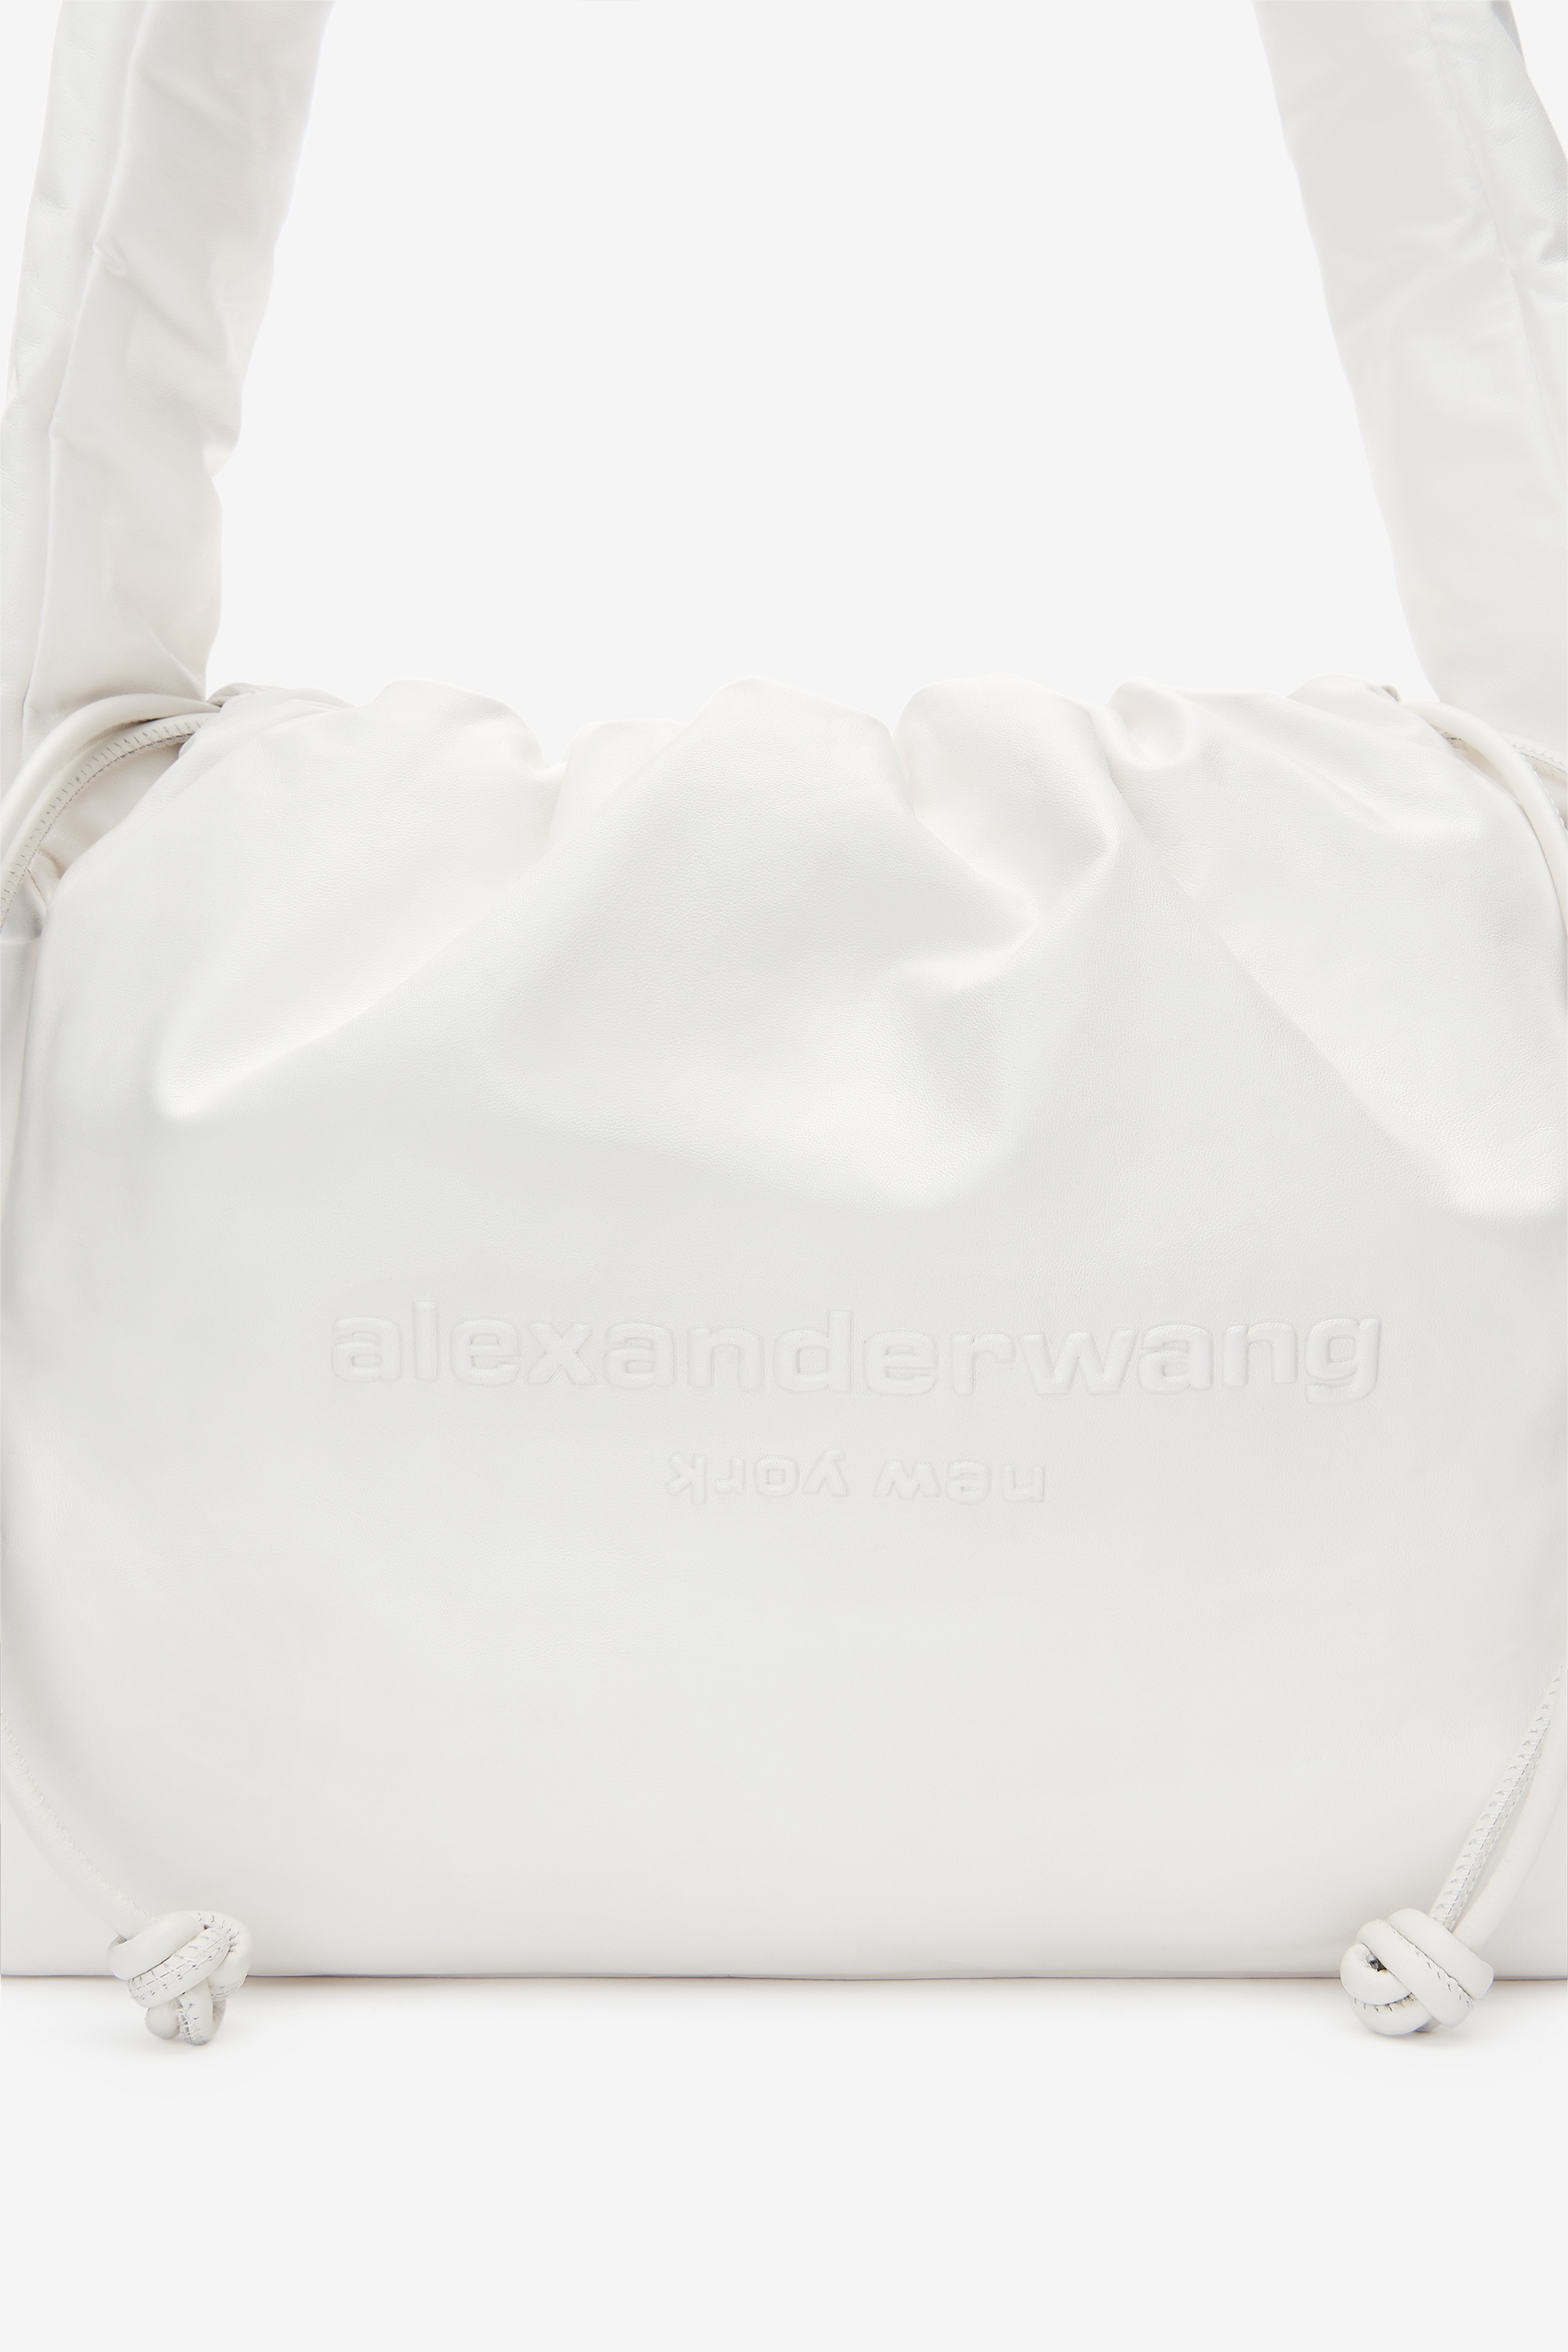 ryan puff large bag in buttery leather - 3